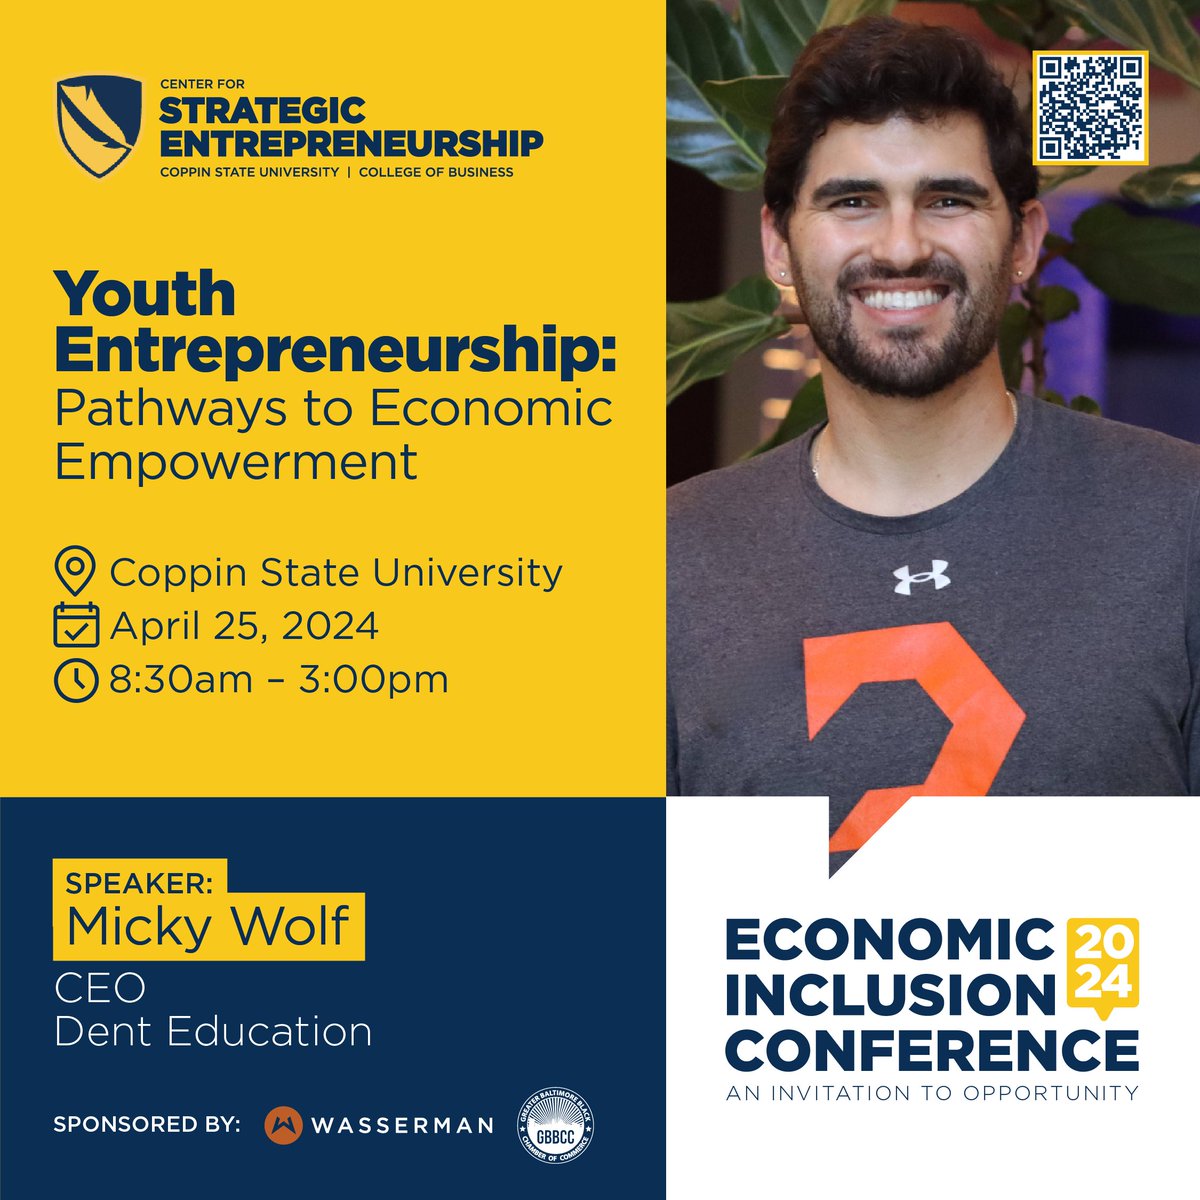 Learn from Micky Wolf and a community of changemakers on April 25, 2024, at Coppin State University. Be inspired by success stories, gain valuable knowledge, and discover how you can contribute to shaping a brighter future. Sign Up - coppin.edu/eicac #Entrepreneurship